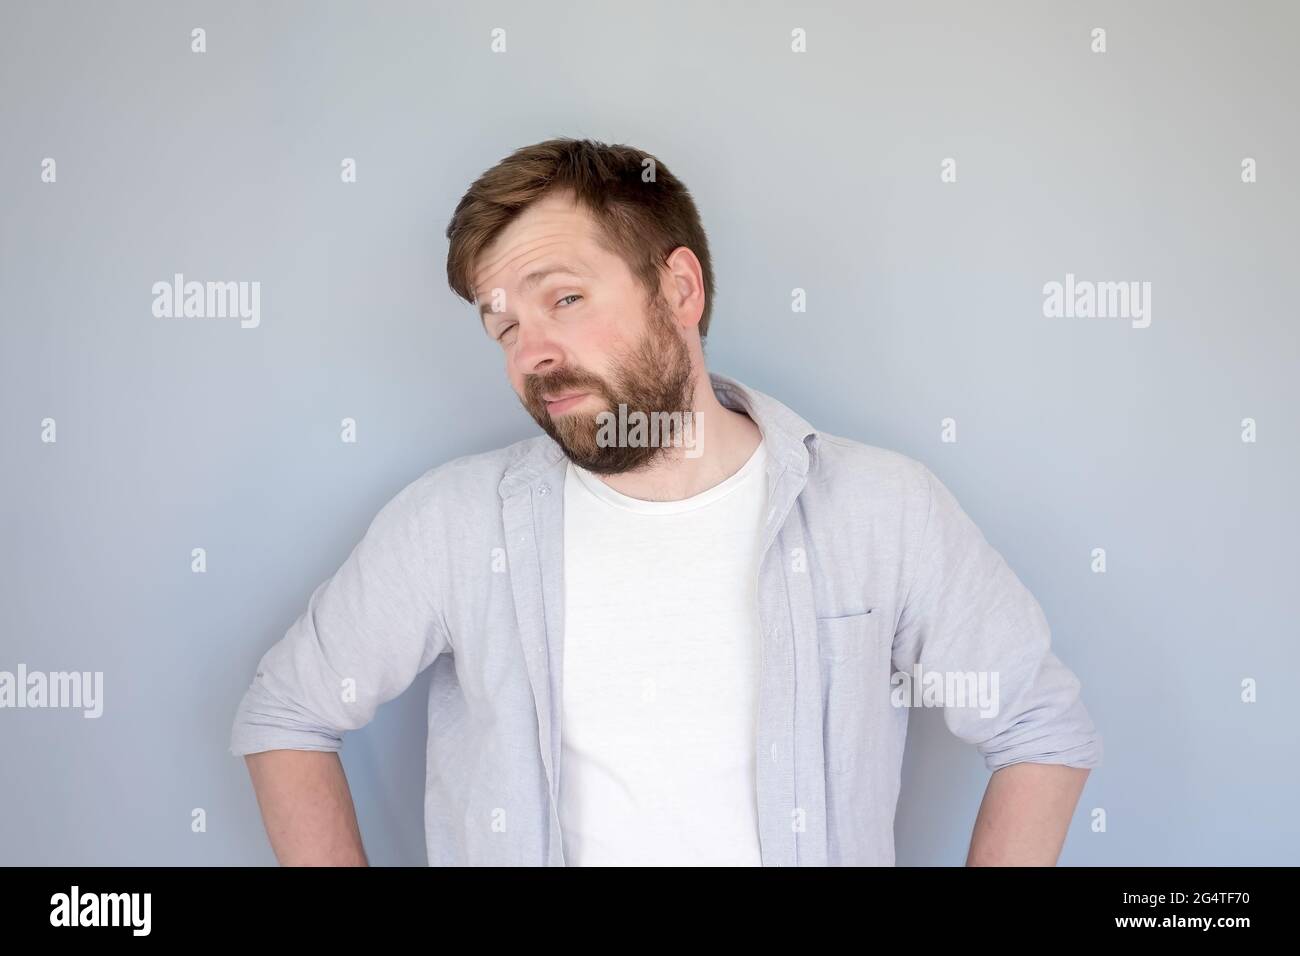 Caucasian bearded man in a shirt looks suspiciously and slyly, narrowing his eyes and akimbo. Gray background. Stock Photo